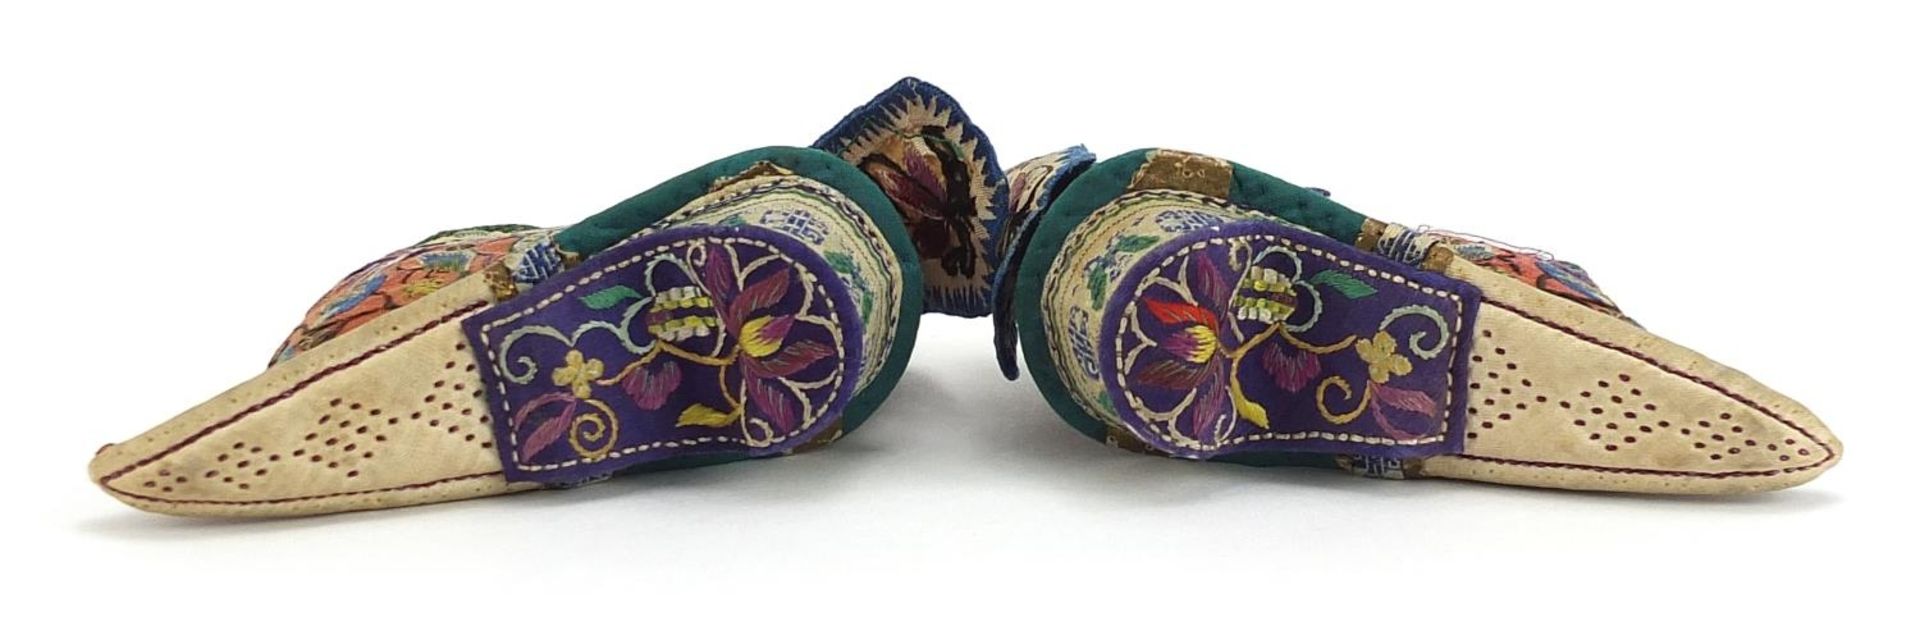 Pair of Chinese silk lotus shoes embroidered with flowers, each 11cm in length - Image 3 of 3